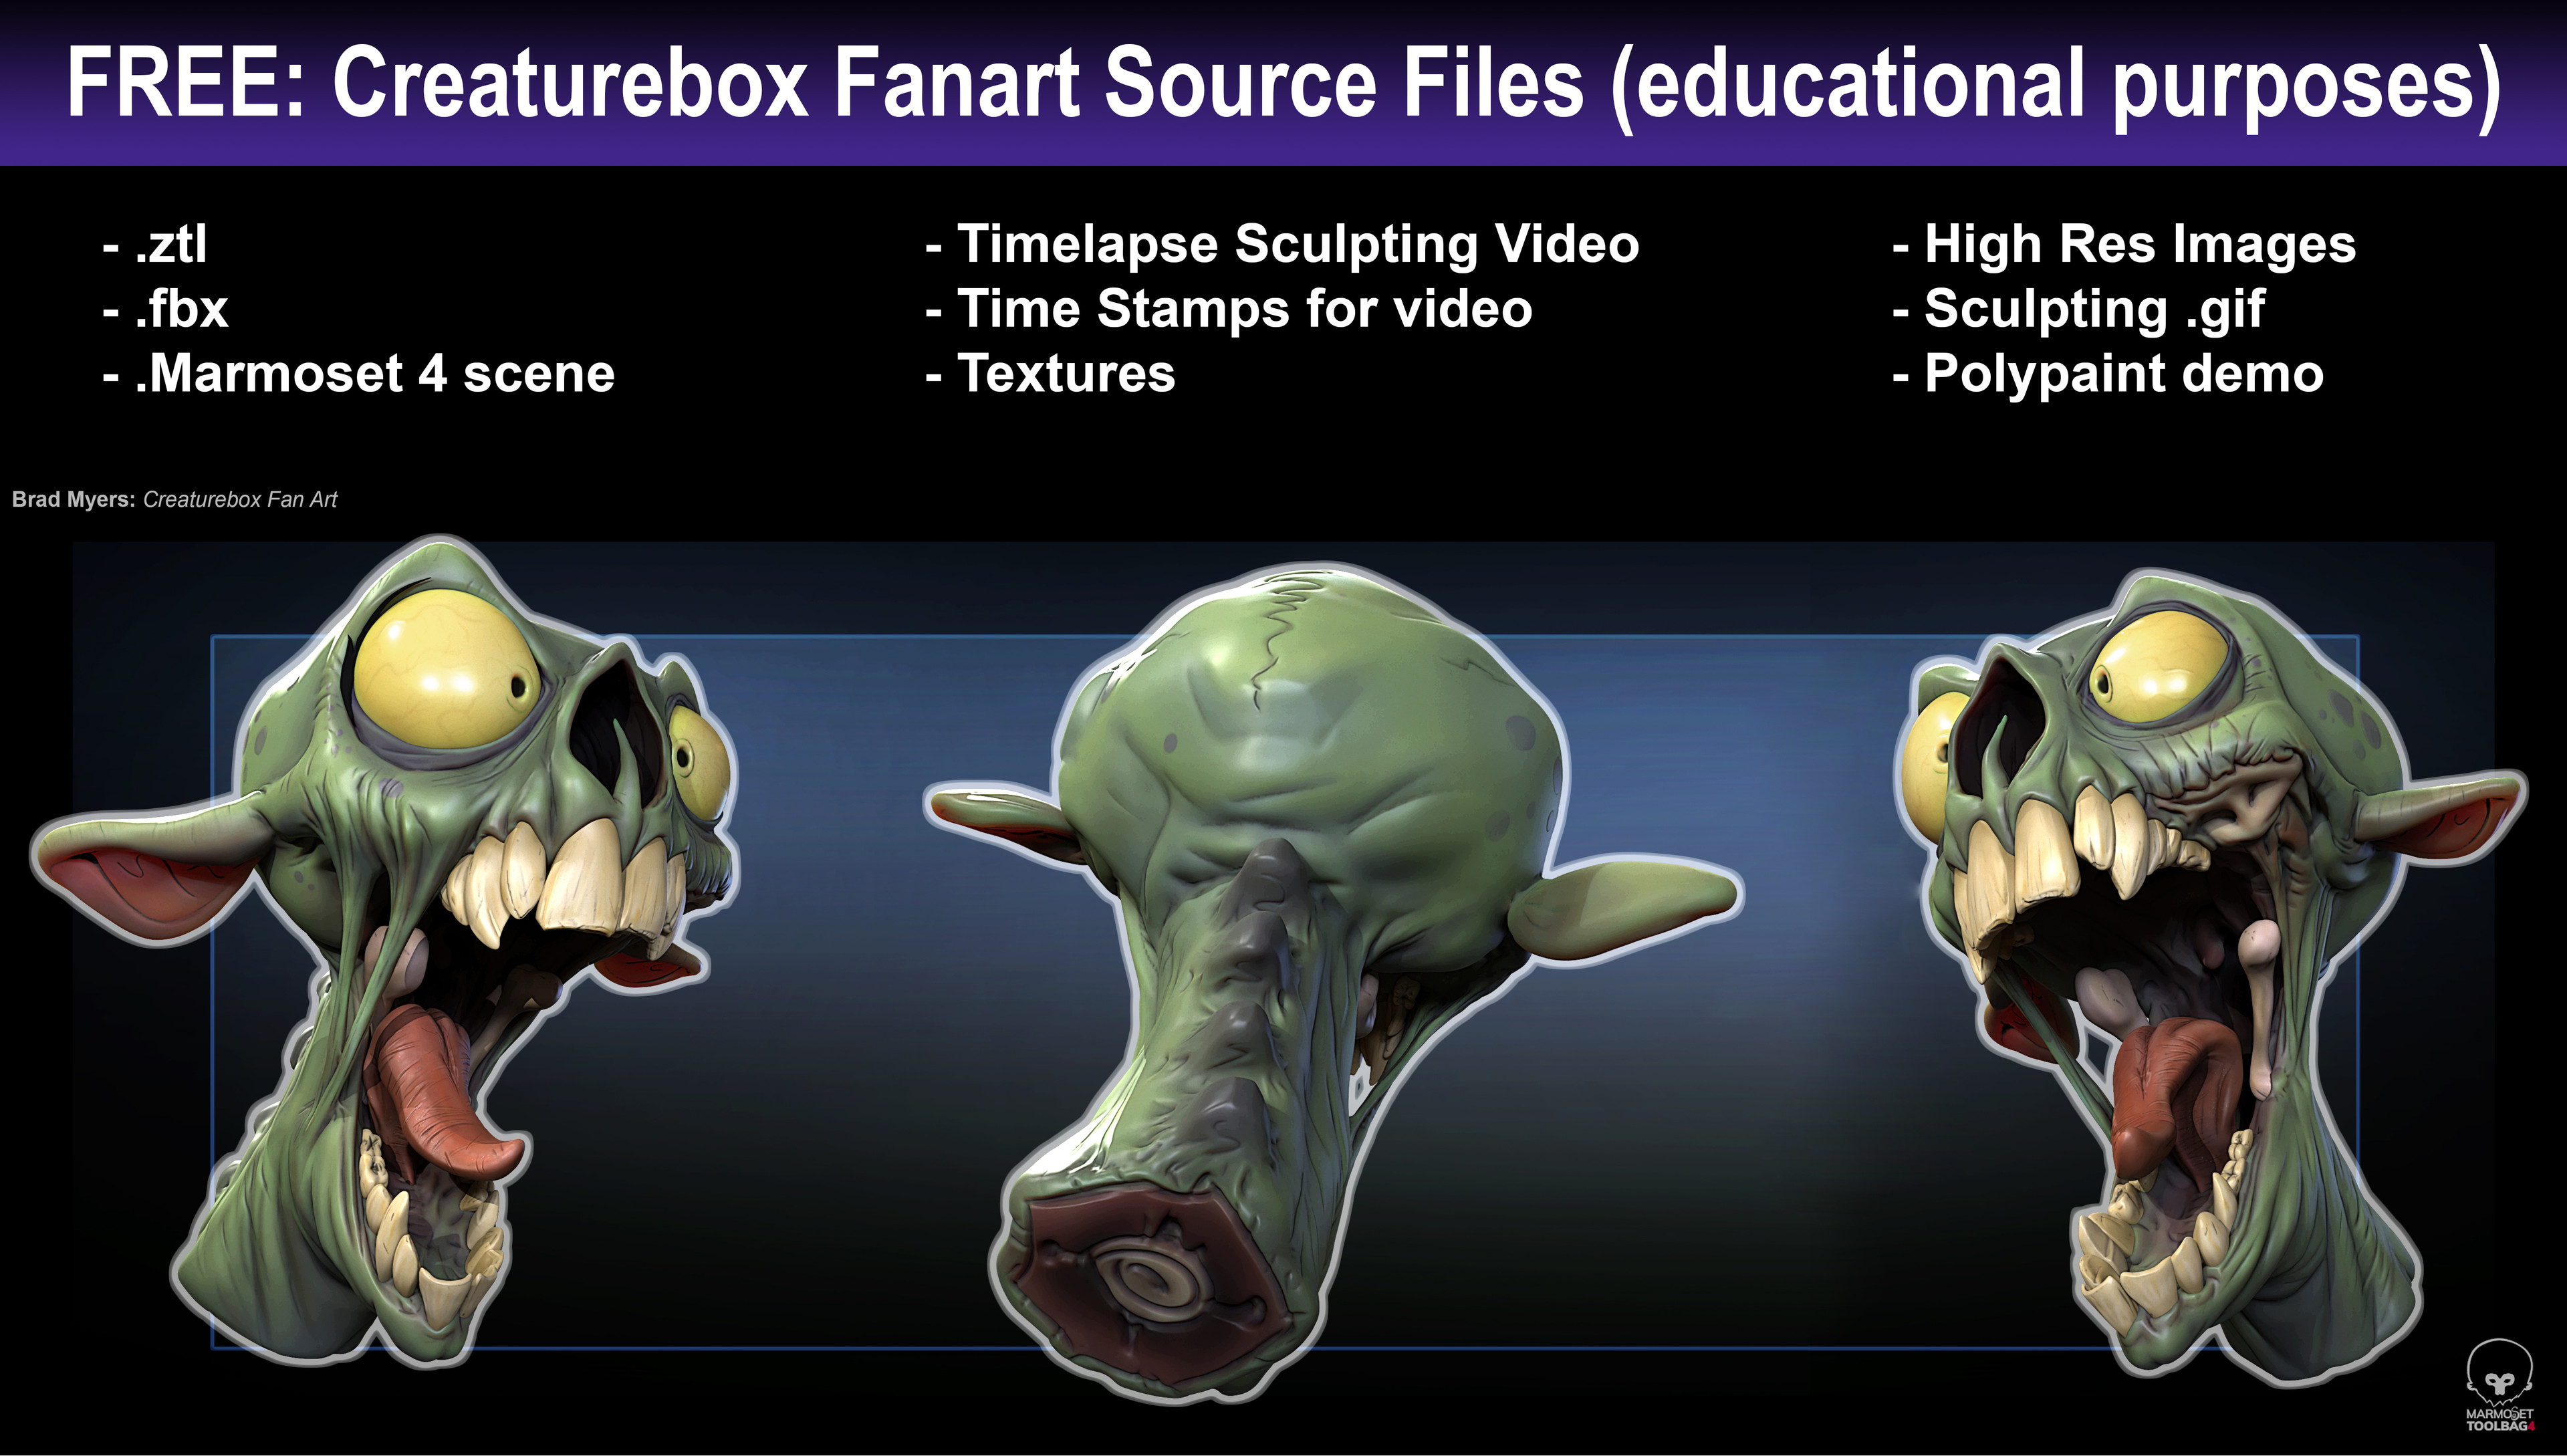 Here is the link for the source file content: https://www.artstation.com/marketplace/p/p2Rk/free-creaturebox-fanart-source-files-educational-purposes